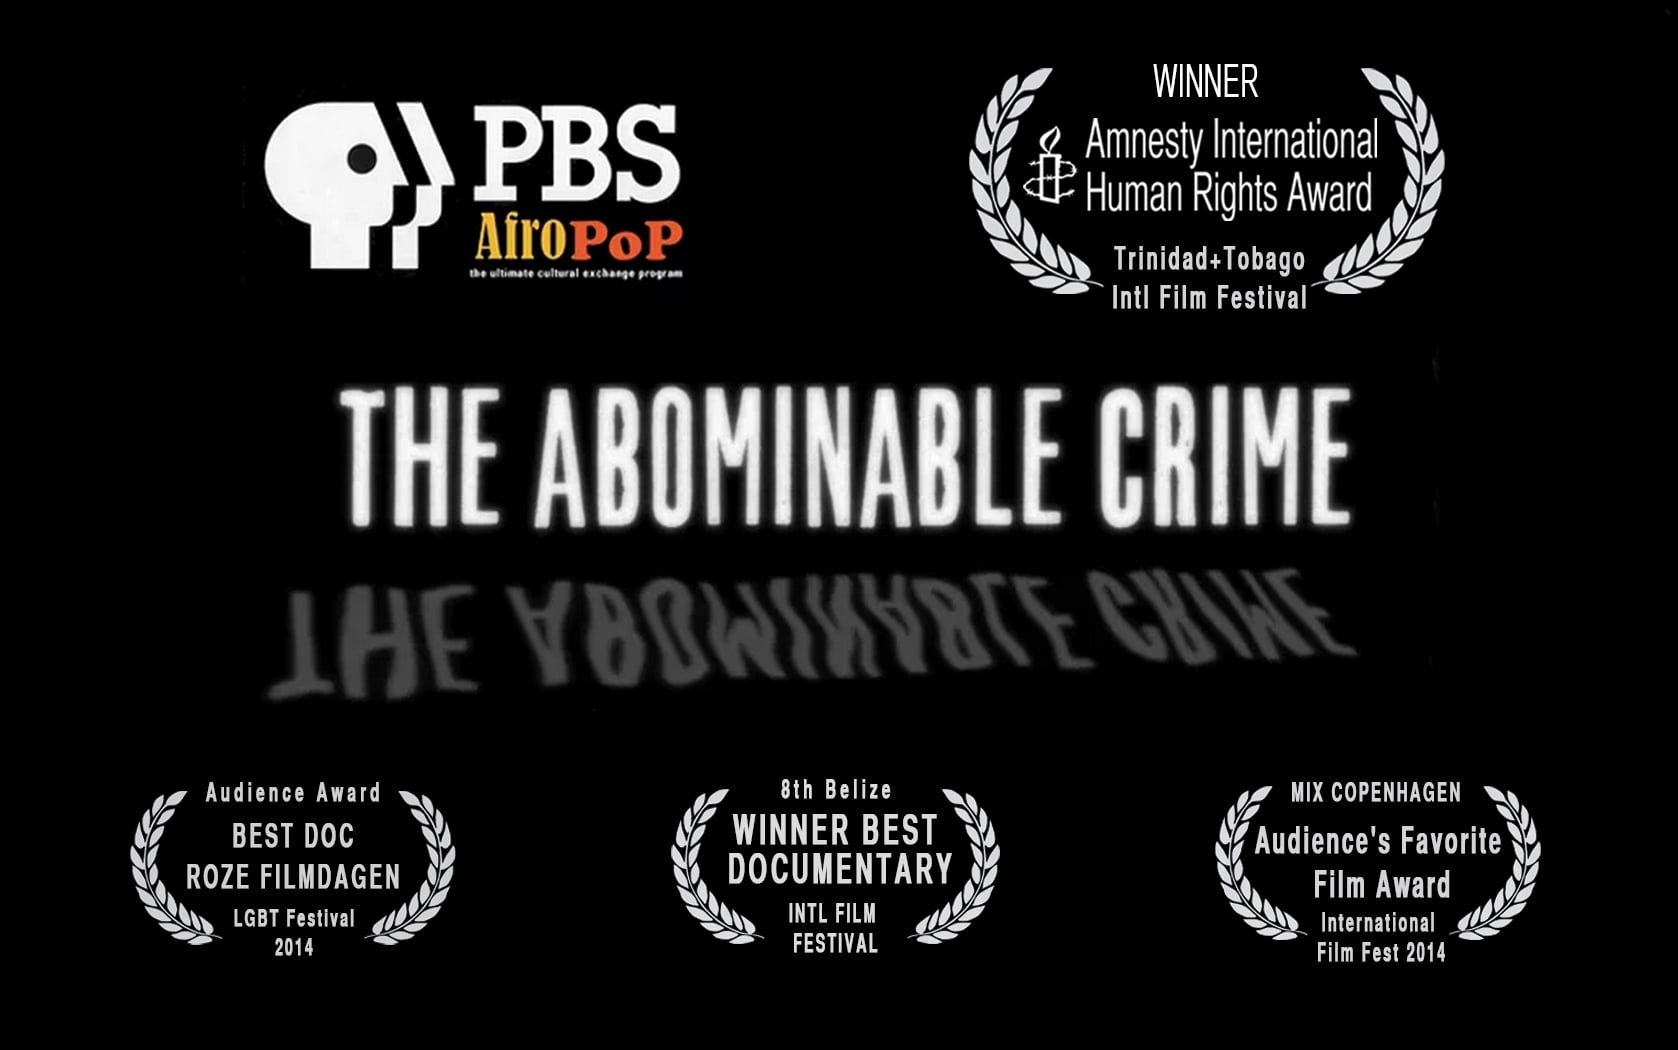 The Abominable Crime Trailer